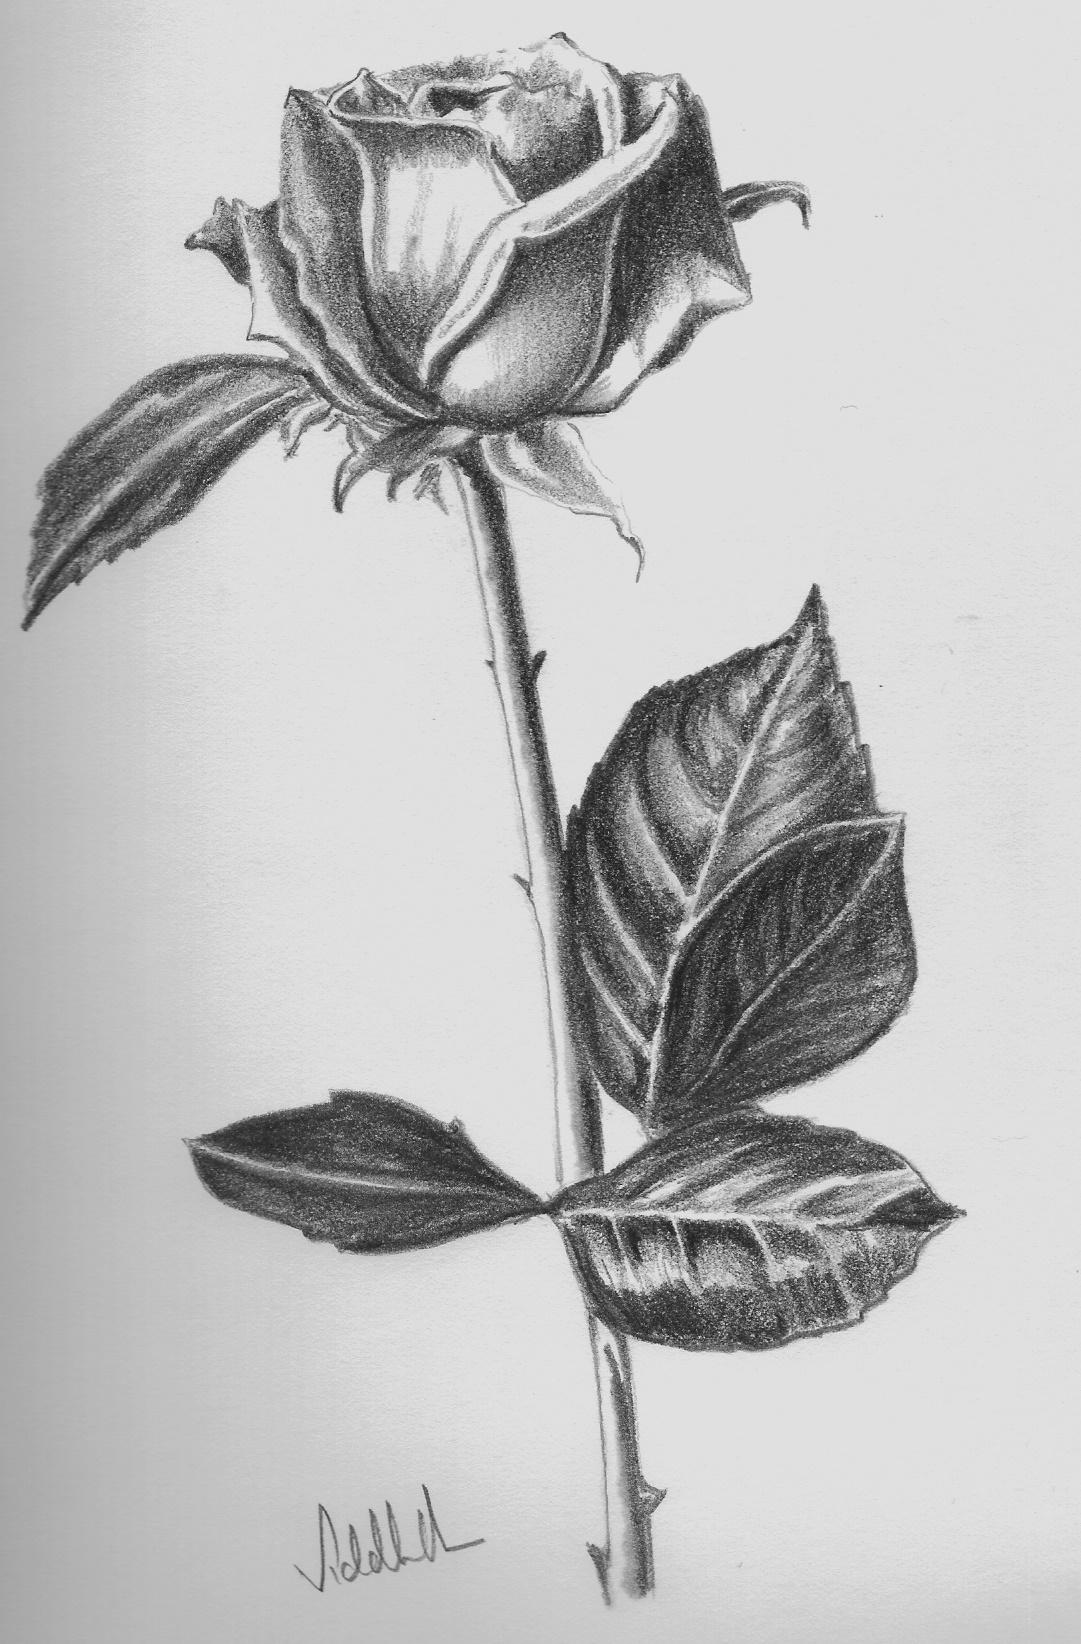 Awesome Rose Drawings The Wondrous Pics